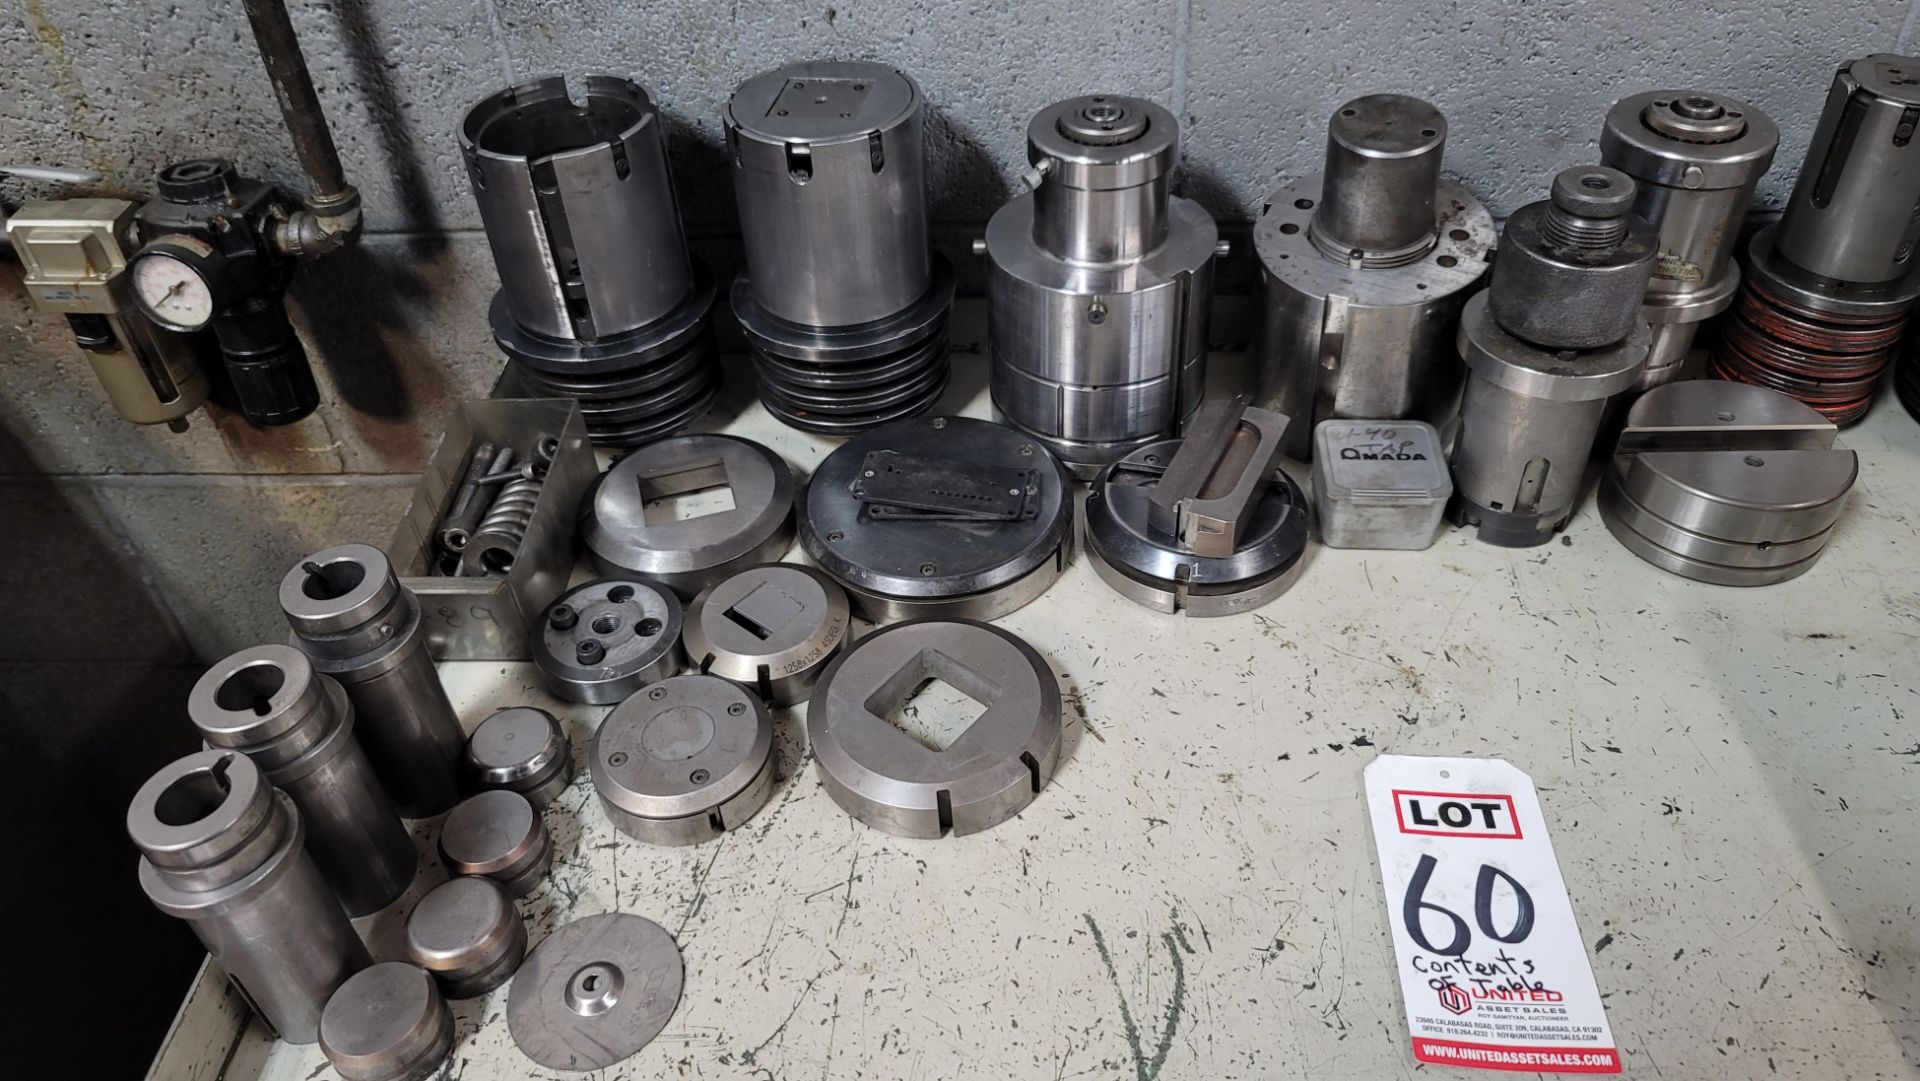 LOT - AMADA TURRET PUNCH PRESS TOOLING, (LOCATION: 2174 W 2300 S) - Image 2 of 3